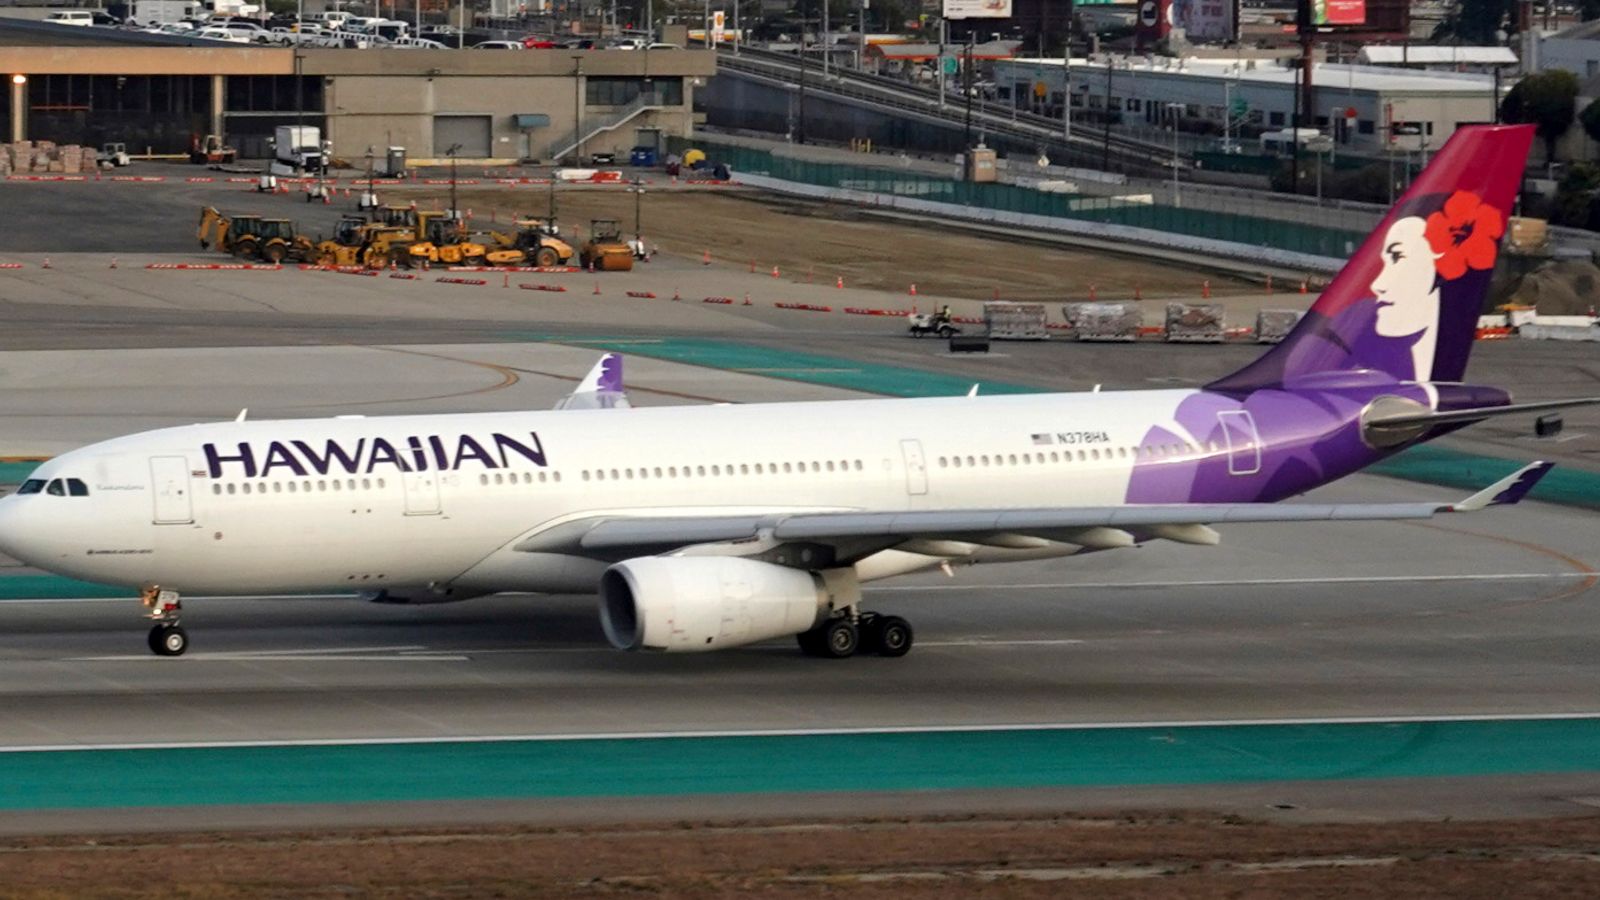 Eleven people seriously injured after turbulence on Hawaiian Airlines flight